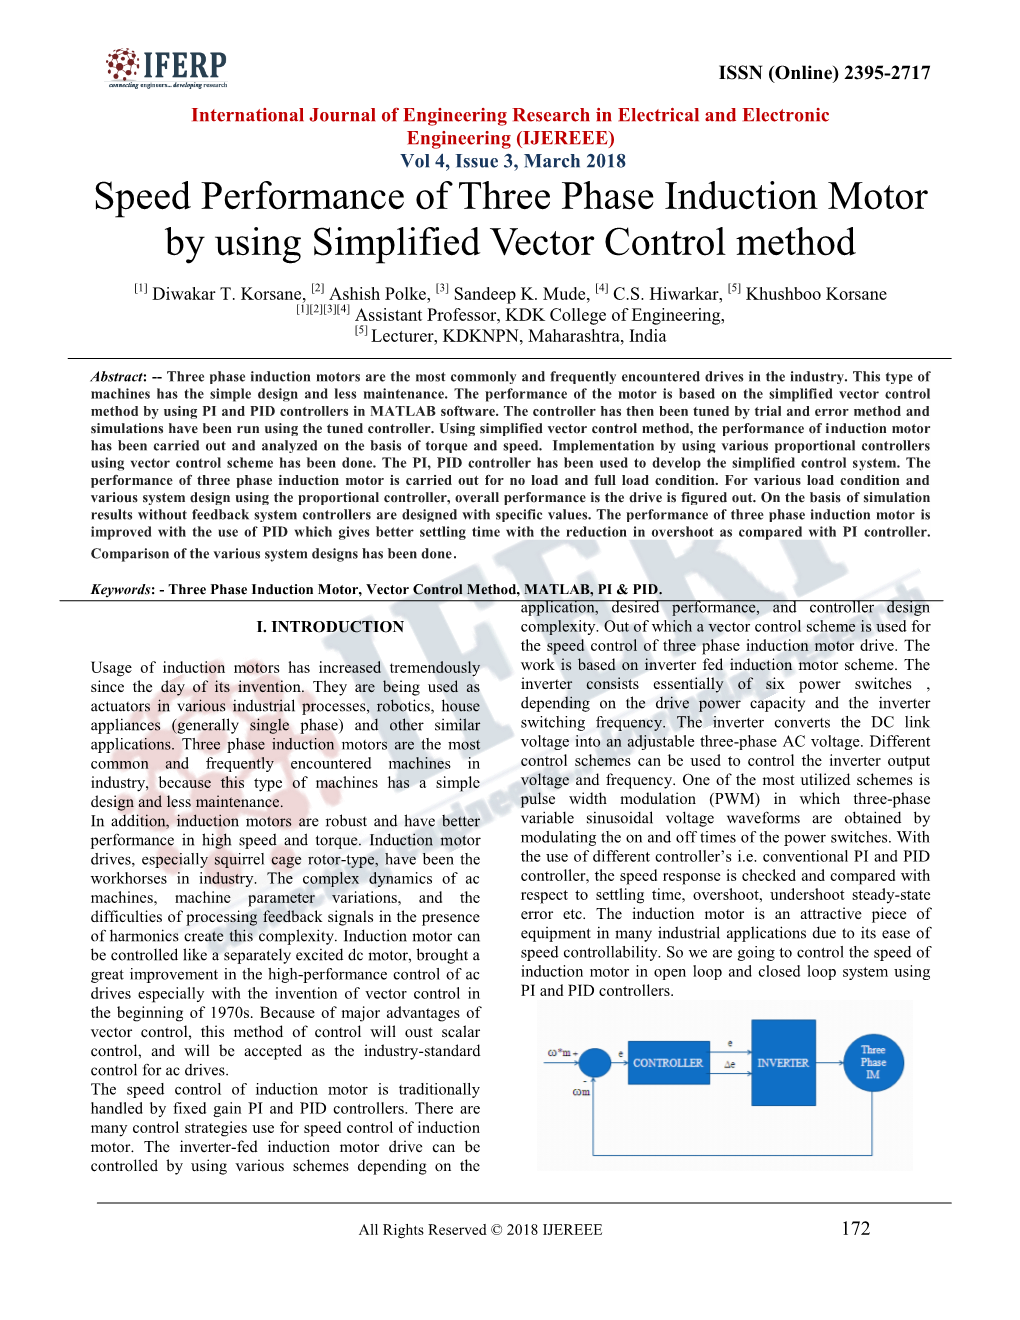 Speed Performance of Three Phase Induction Motor by Using Simplified Vector Control Method